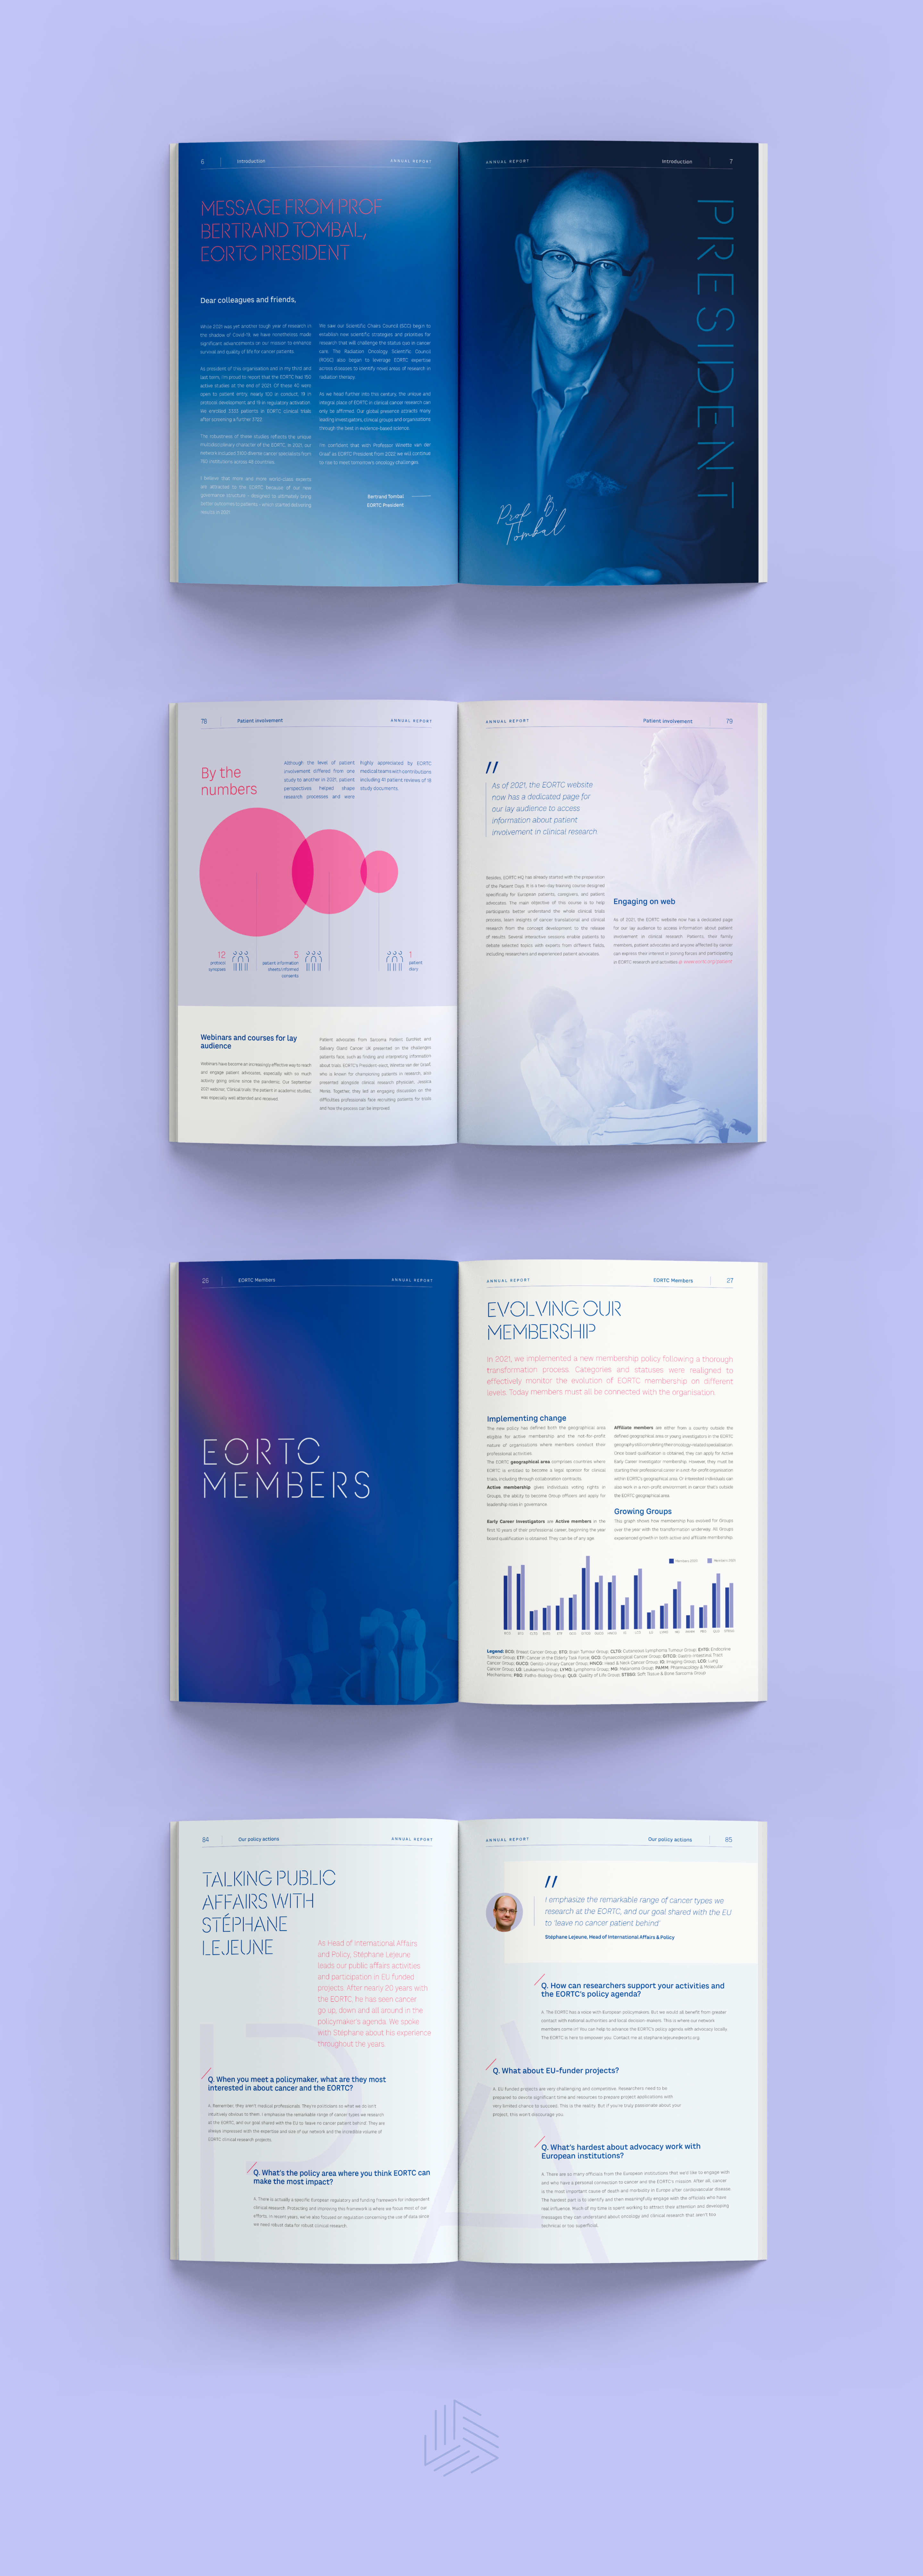 Some examples of infographics and pages for the EORTC Annual Report by Atelier Design, creative communications agency Brussels